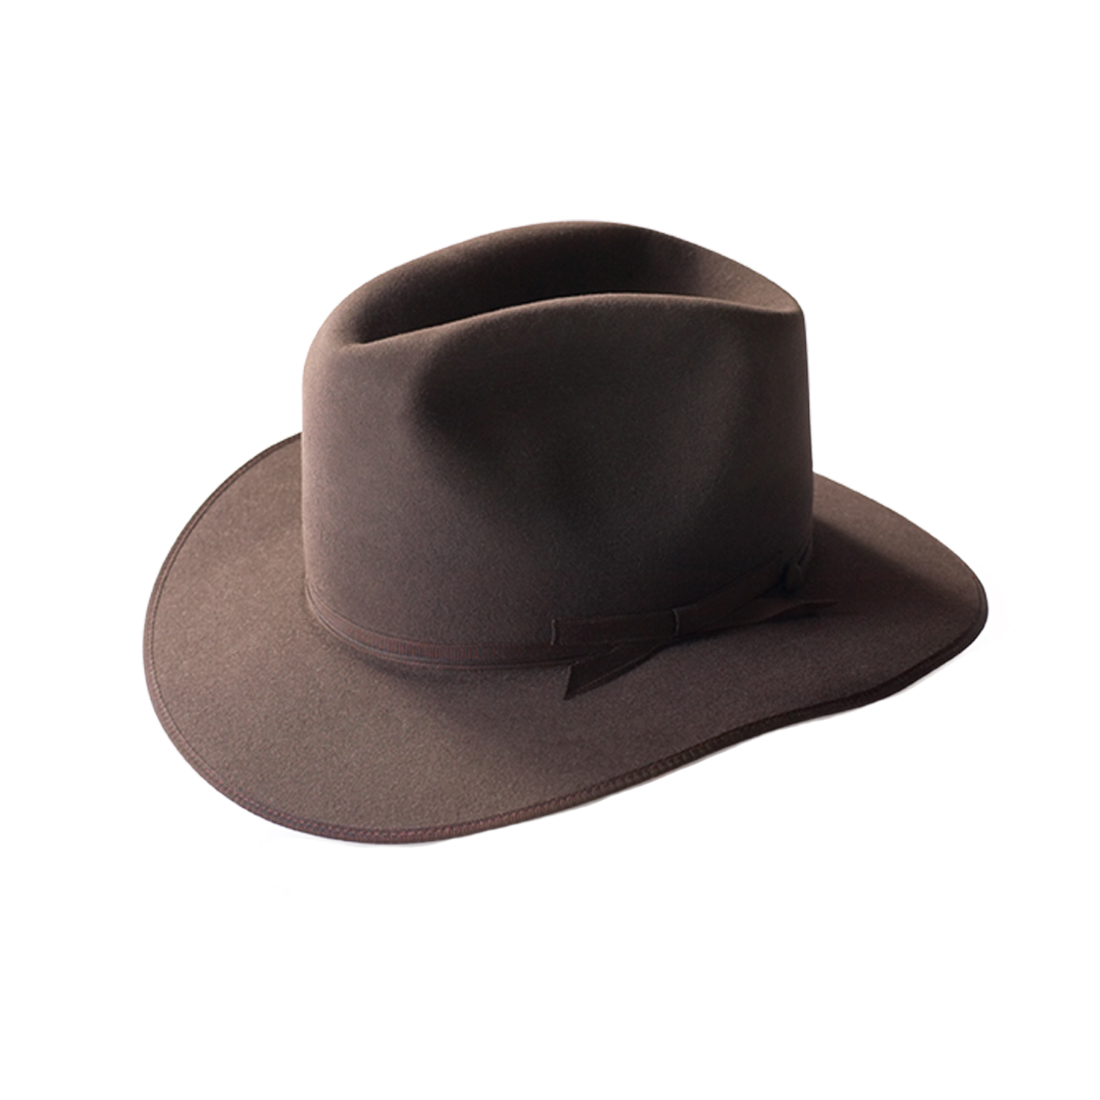 Rm williams hat by akubra | The Fedora Lounge